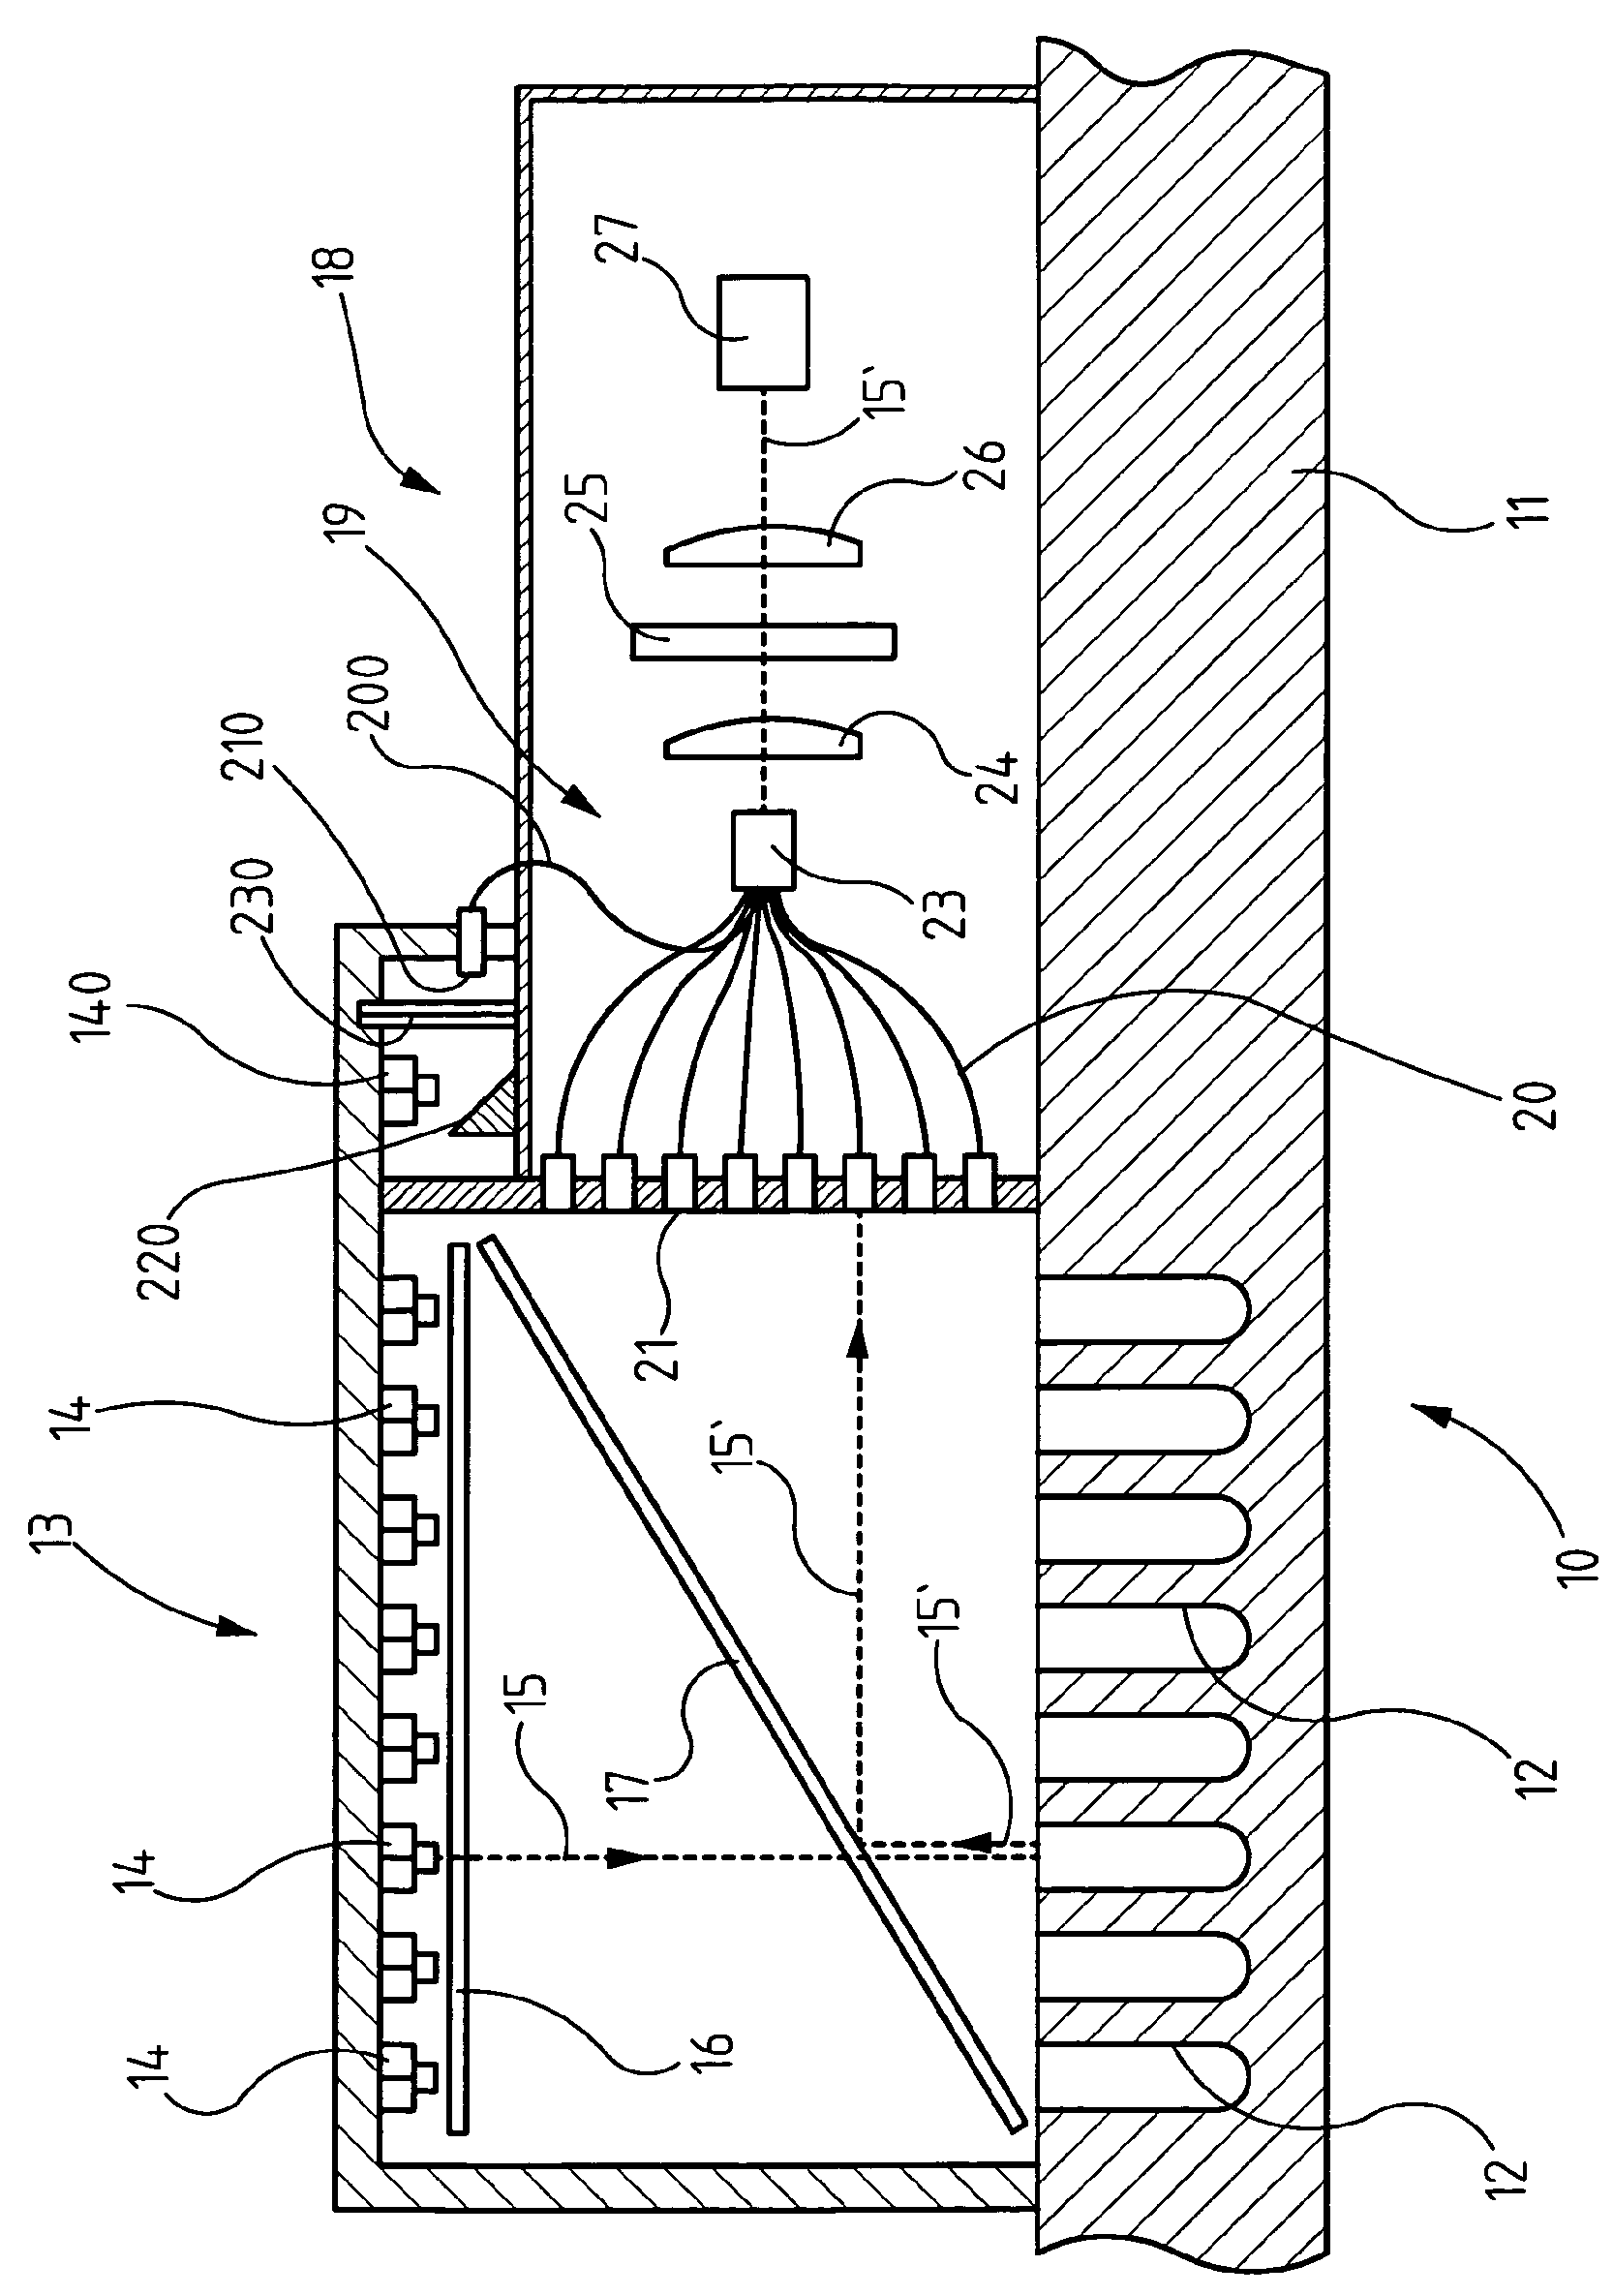 Apparatus for carrying out real-time PCR reactions